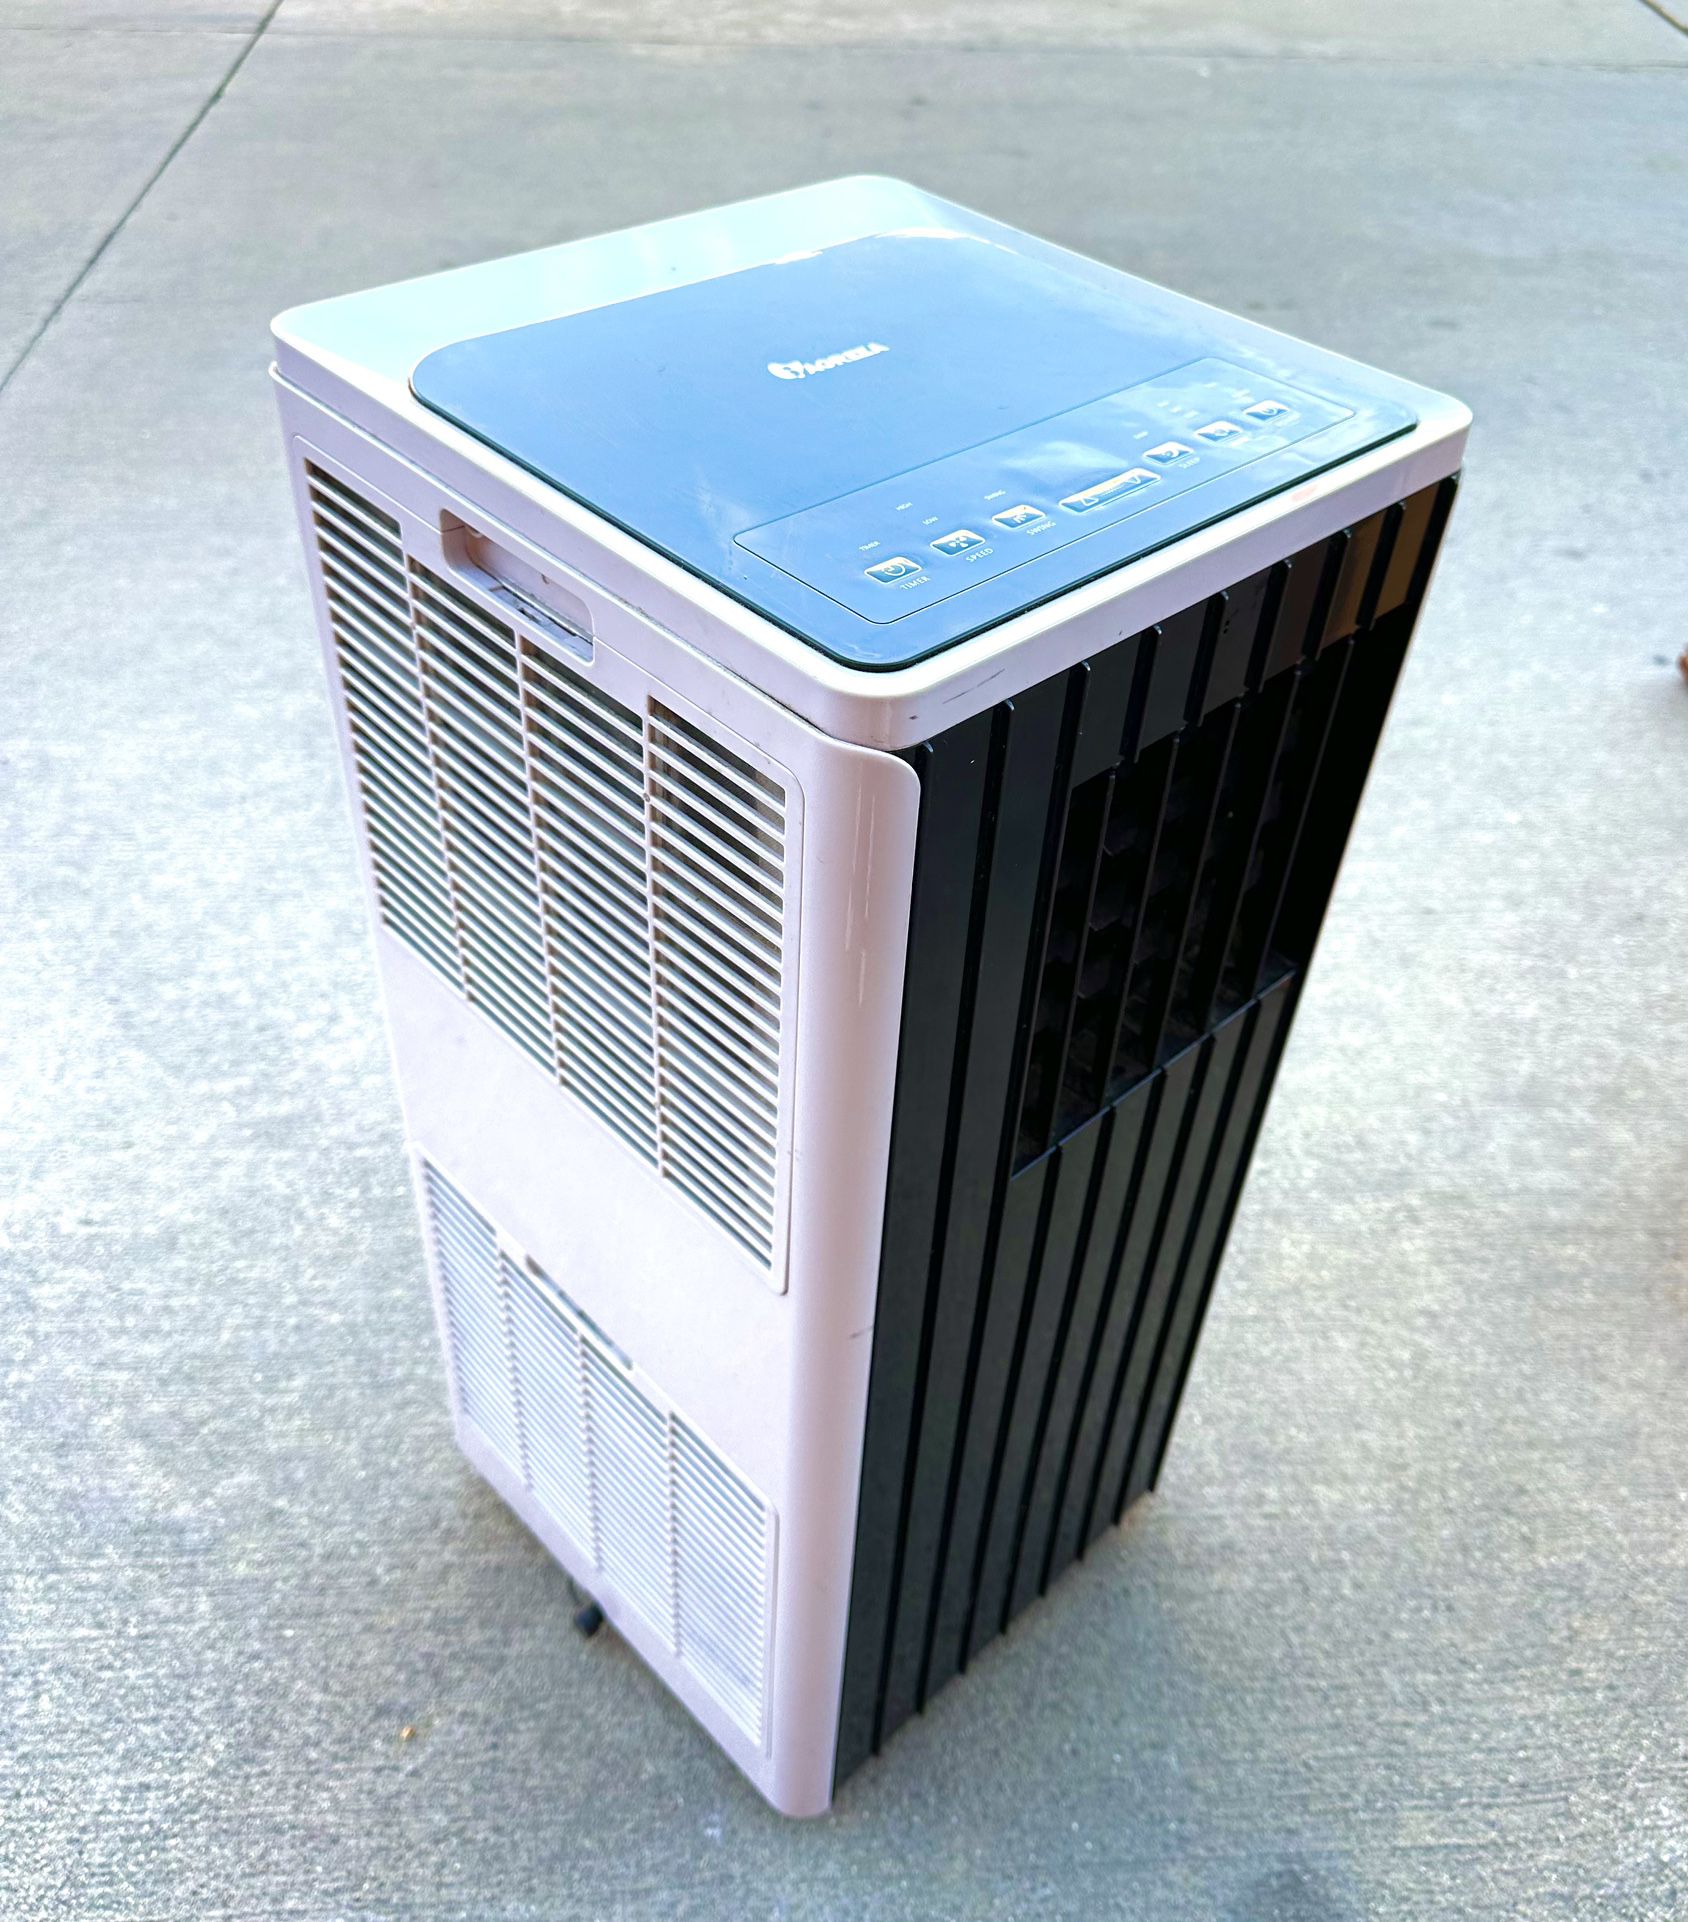 Portable AIR CONDITIONER AC Unit for Rooms up to 400 Sq.Ft with Dehumidifier, Fan Modes, Auto Cooling & 24 Hour Timer